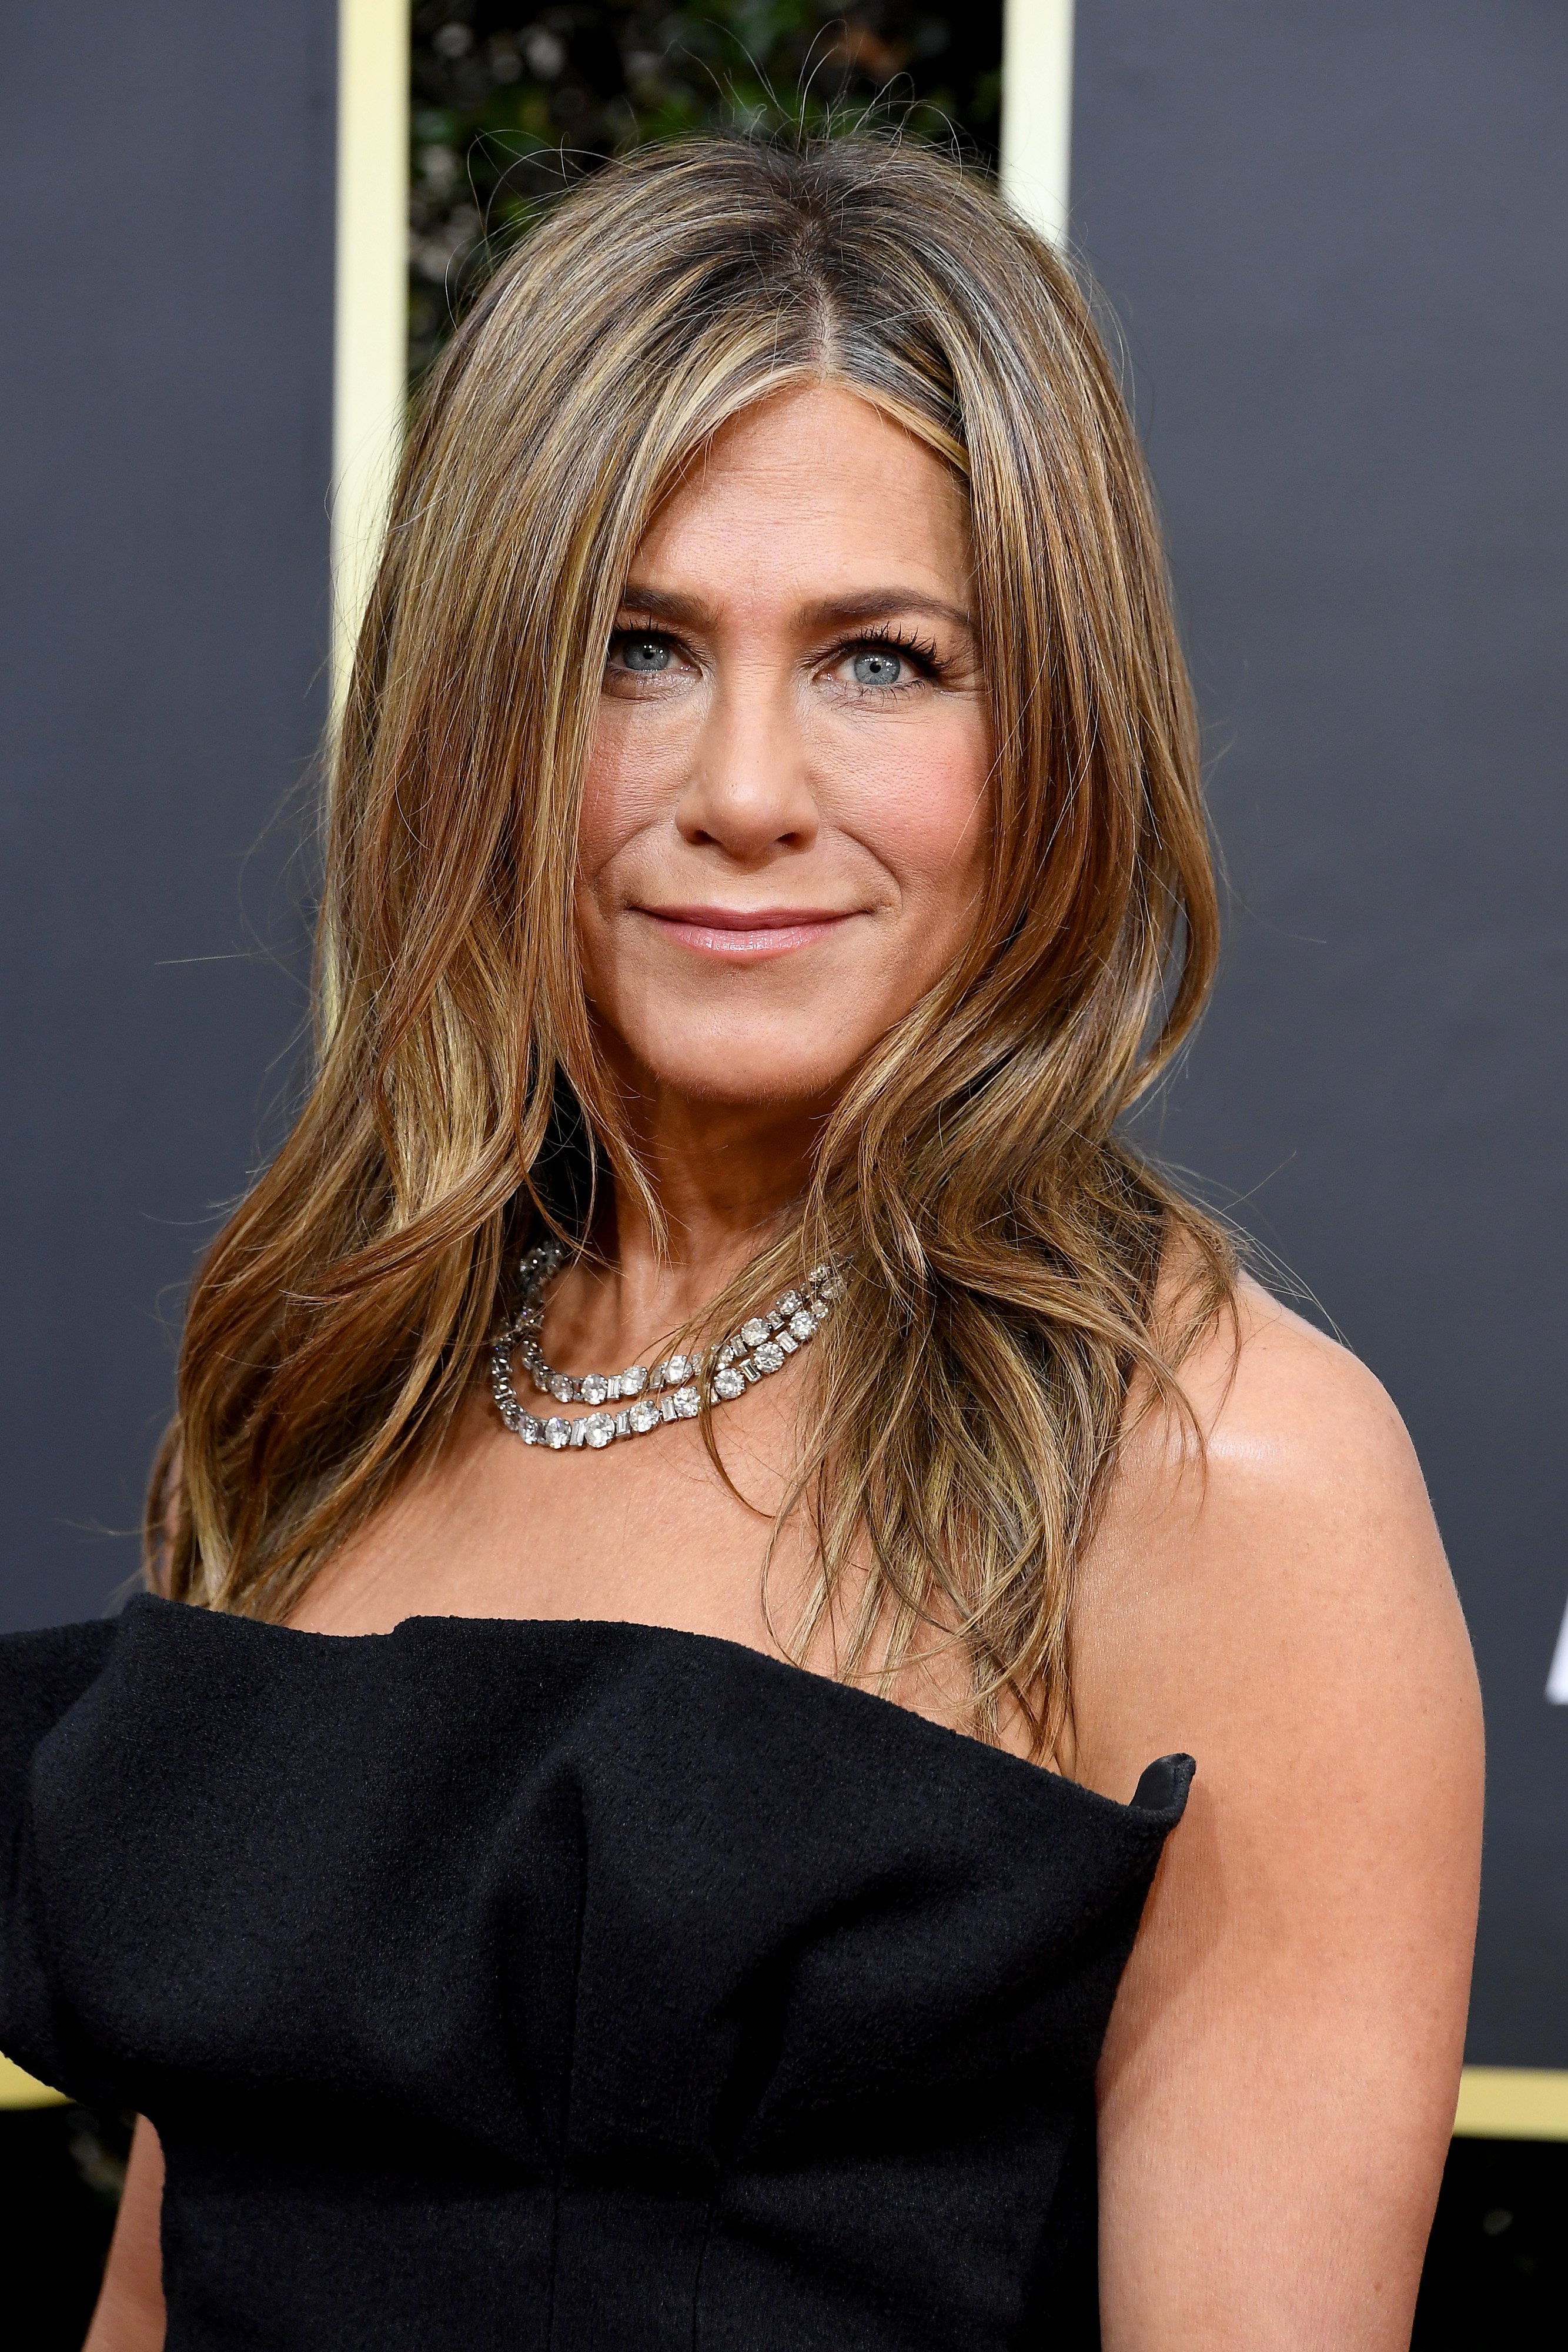 Jennifer Aniston at the 77th Annual Golden Globe Awards on January 5, 2020, in Beverly Hills, California. | Source: Steve Granitz/WireImage/Getty Images